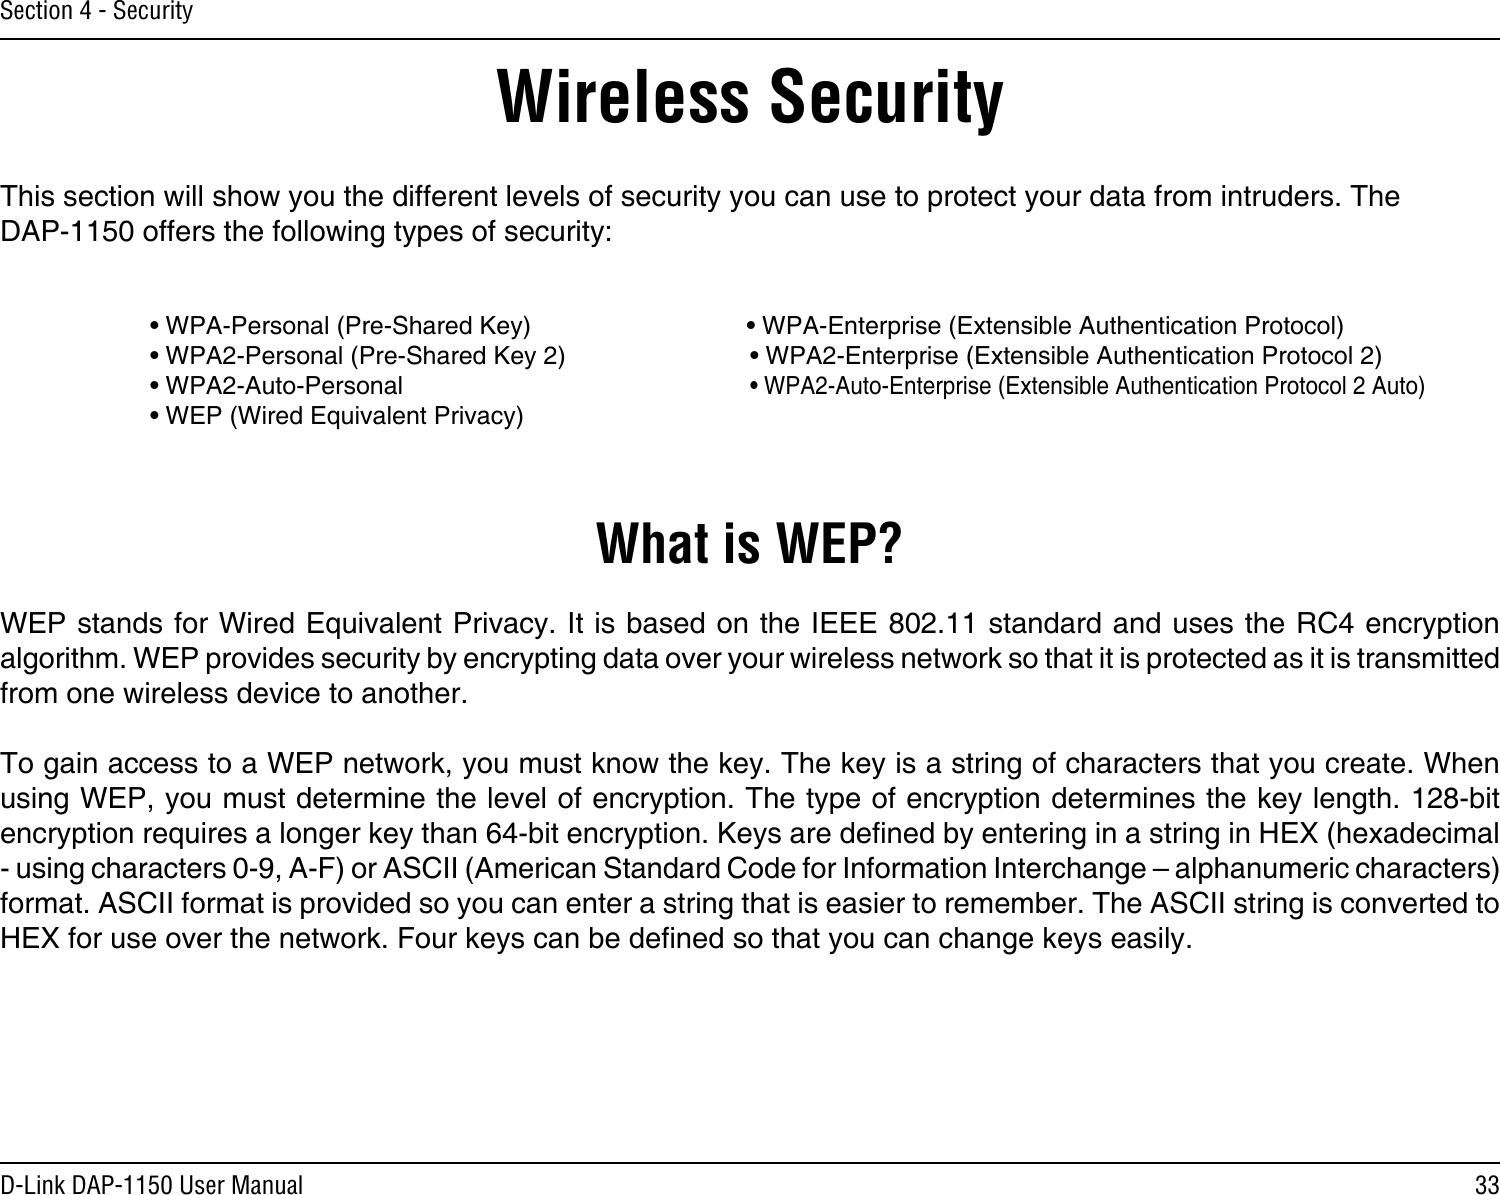 33D-Link DAP-1150 User ManualSection 4 - SecurityWireless SecurityThis section will show you the different levels of security you can use to protect your data from intruders. The DAP-1150 offers the following types of security:    • WPA-Personal (Pre-Shared Key)                               • WPA-Enterprise (Extensible Authentication Protocol)    • WPA2-Personal (Pre-Shared Key 2)      • WPA2-Enterprise (Extensible Authentication Protocol 2)    • WPA2-Auto-Personal         • WPA2-Auto-Enterprise (Extensible Authentication Protocol 2 Auto)    • WEP (Wired Equivalent Privacy)What is WEP?WEP stands for Wired Equivalent Privacy. It is based on the IEEE 802.11 standard and uses the RC4 encryption algorithm. WEP provides security by encrypting data over your wireless network so that it is protected as it is transmitted from one wireless device to another.To gain access to a WEP network, you must know the key. The key is a string of characters that you create. When using WEP, you must determine the level of encryption. The type of encryption determines the key length. 128-bit encryption requires a longer key than 64-bit encryption. Keys are dened by entering in a string in HEX (hexadecimal - using characters 0-9, A-F) or ASCII (American Standard Code for Information Interchange – alphanumeric characters) format. ASCII format is provided so you can enter a string that is easier to remember. The ASCII string is converted to HEX for use over the network. Four keys can be dened so that you can change keys easily.